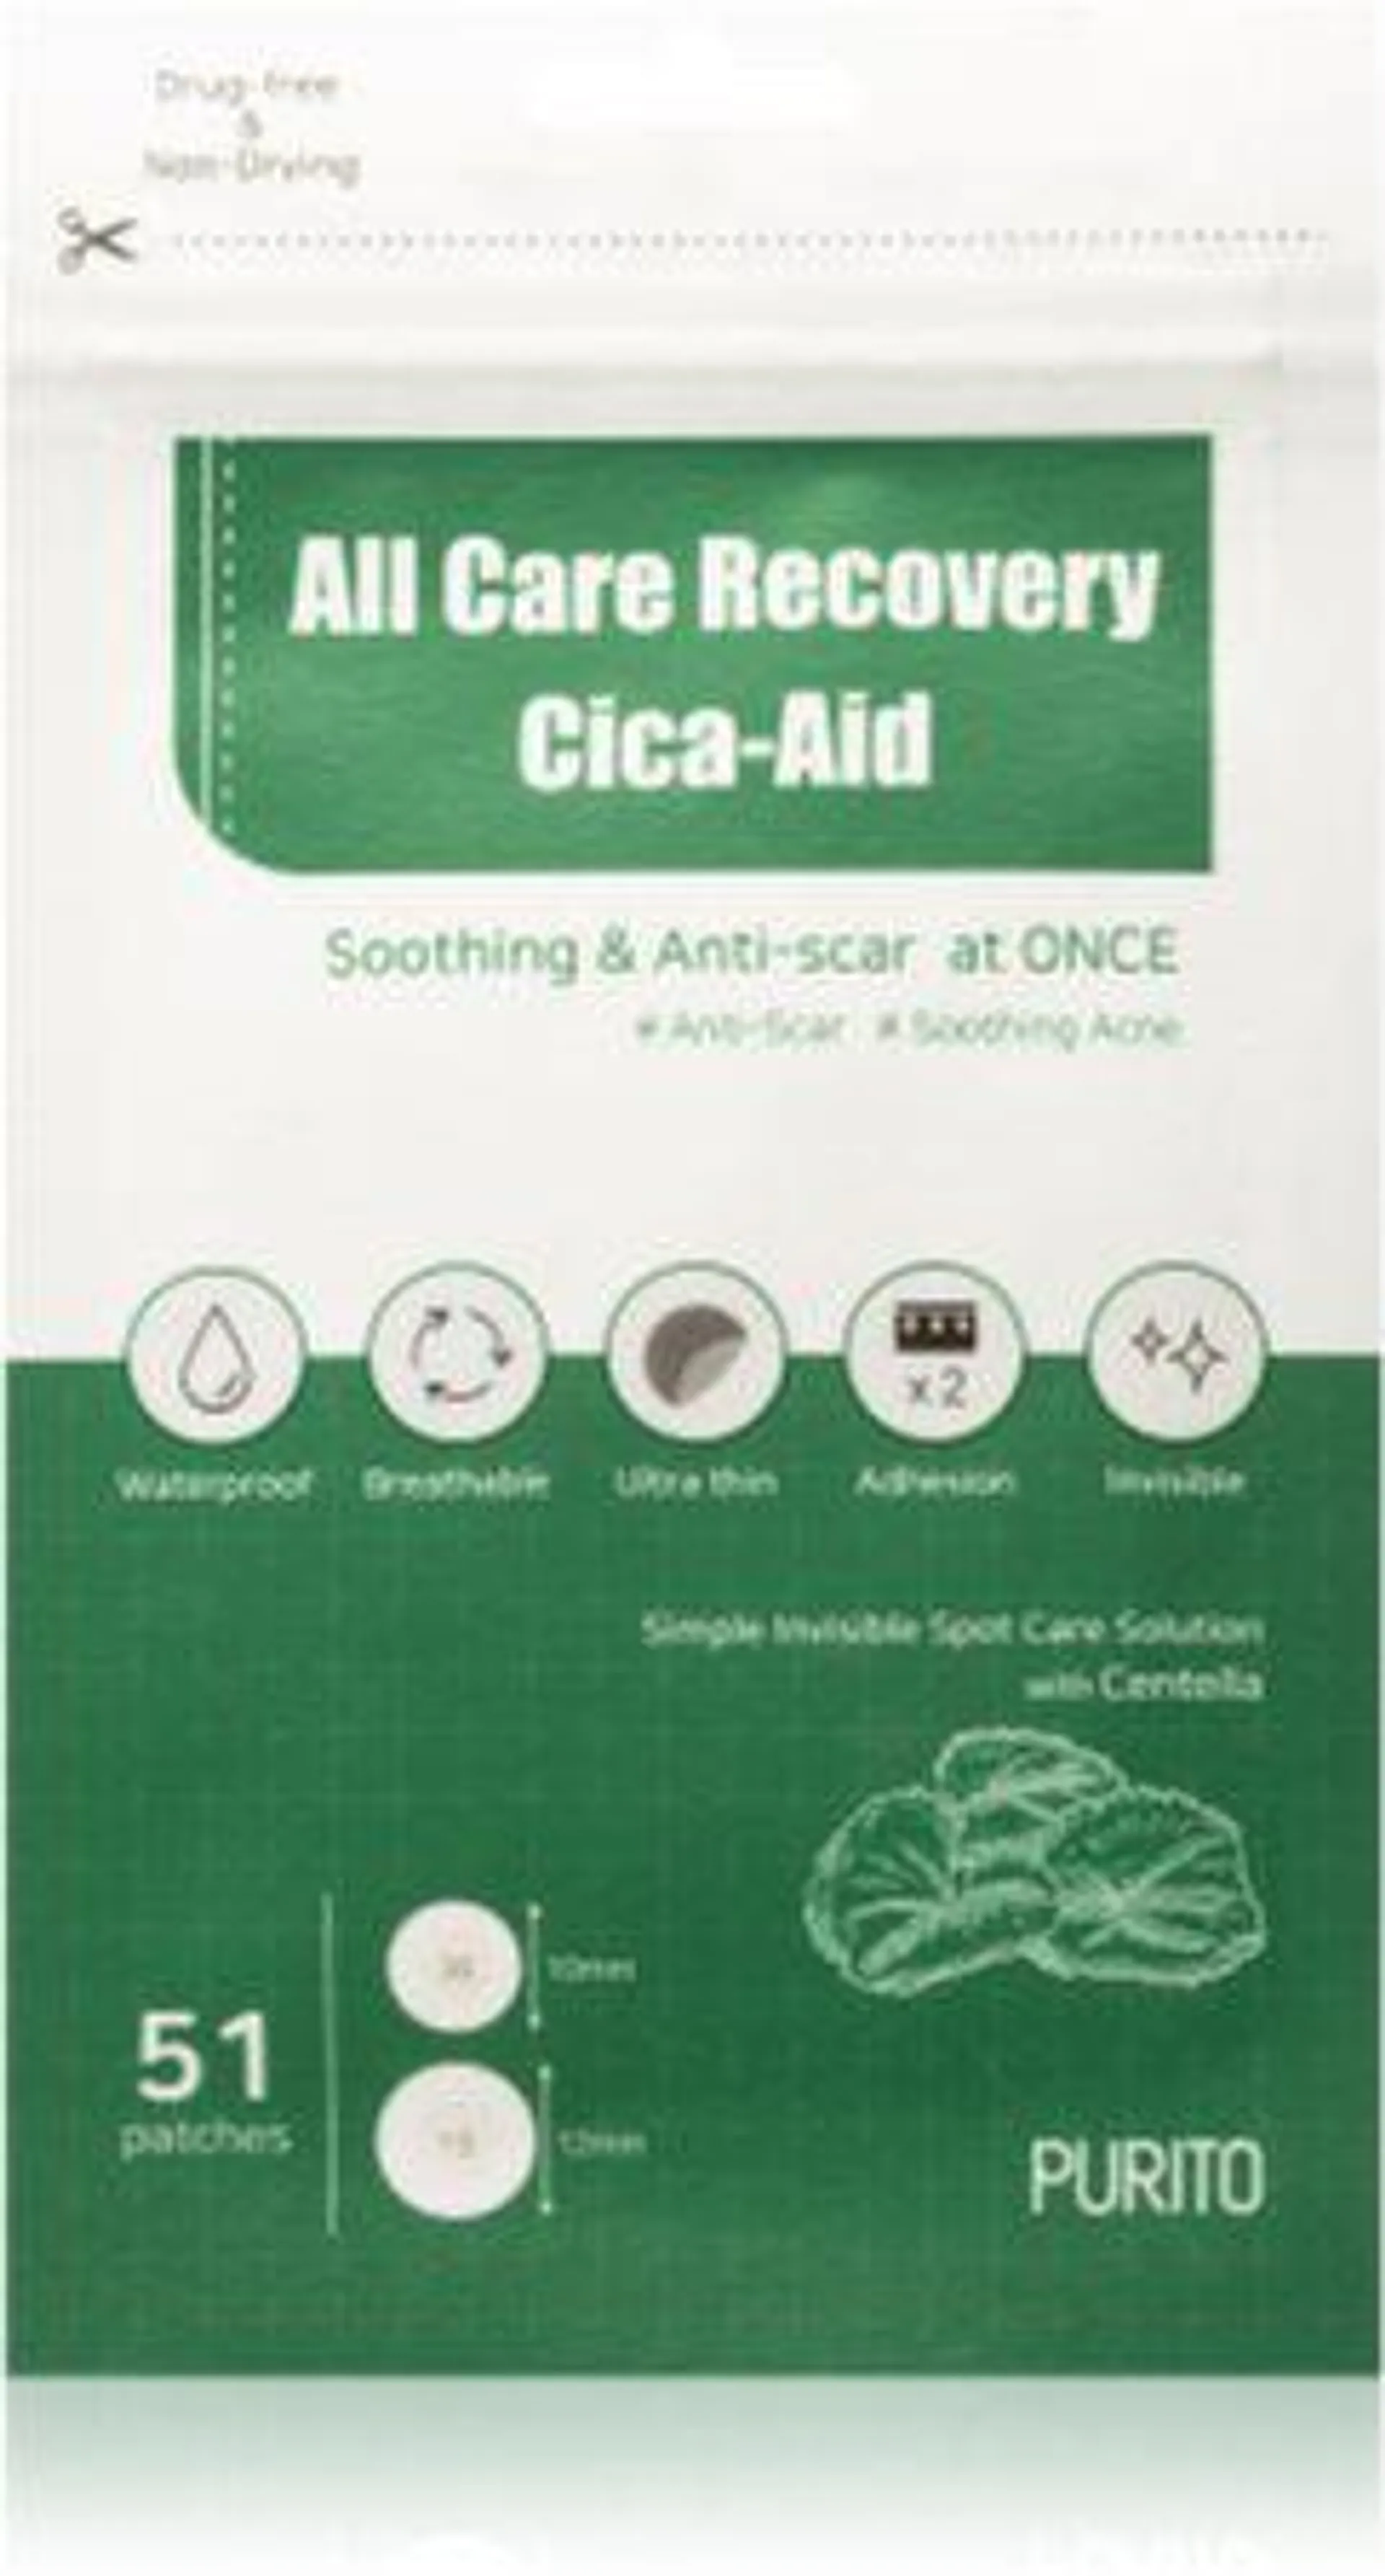 All Care Recovery Cica Aid